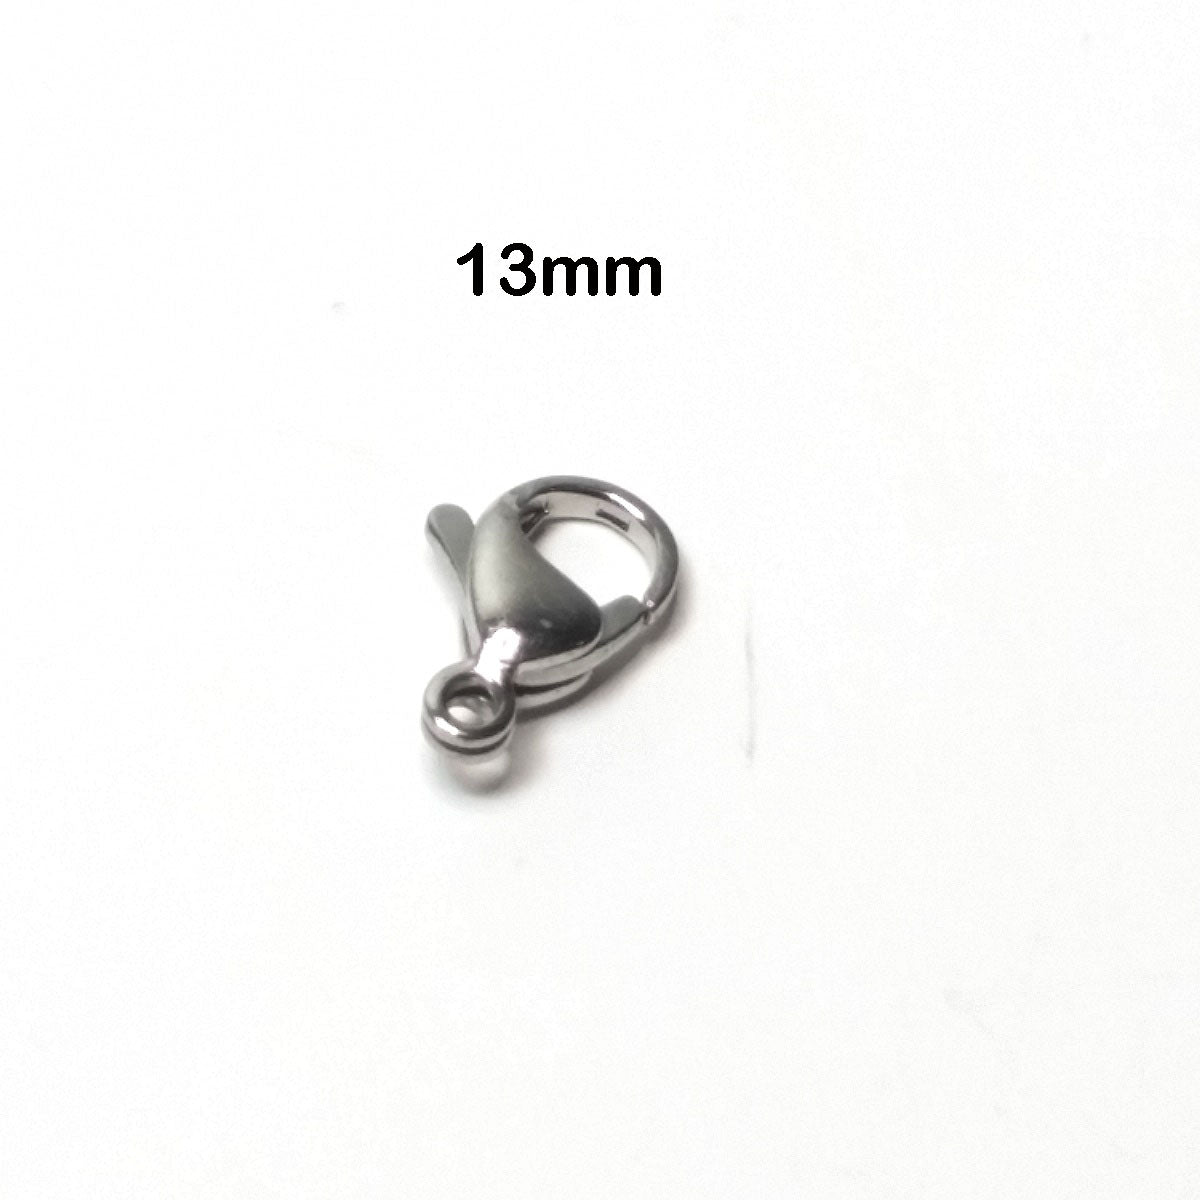 12mm Lobster Clasps, Stainless Steel, Lot Size 100 Clasps - Jewelry Tool Box